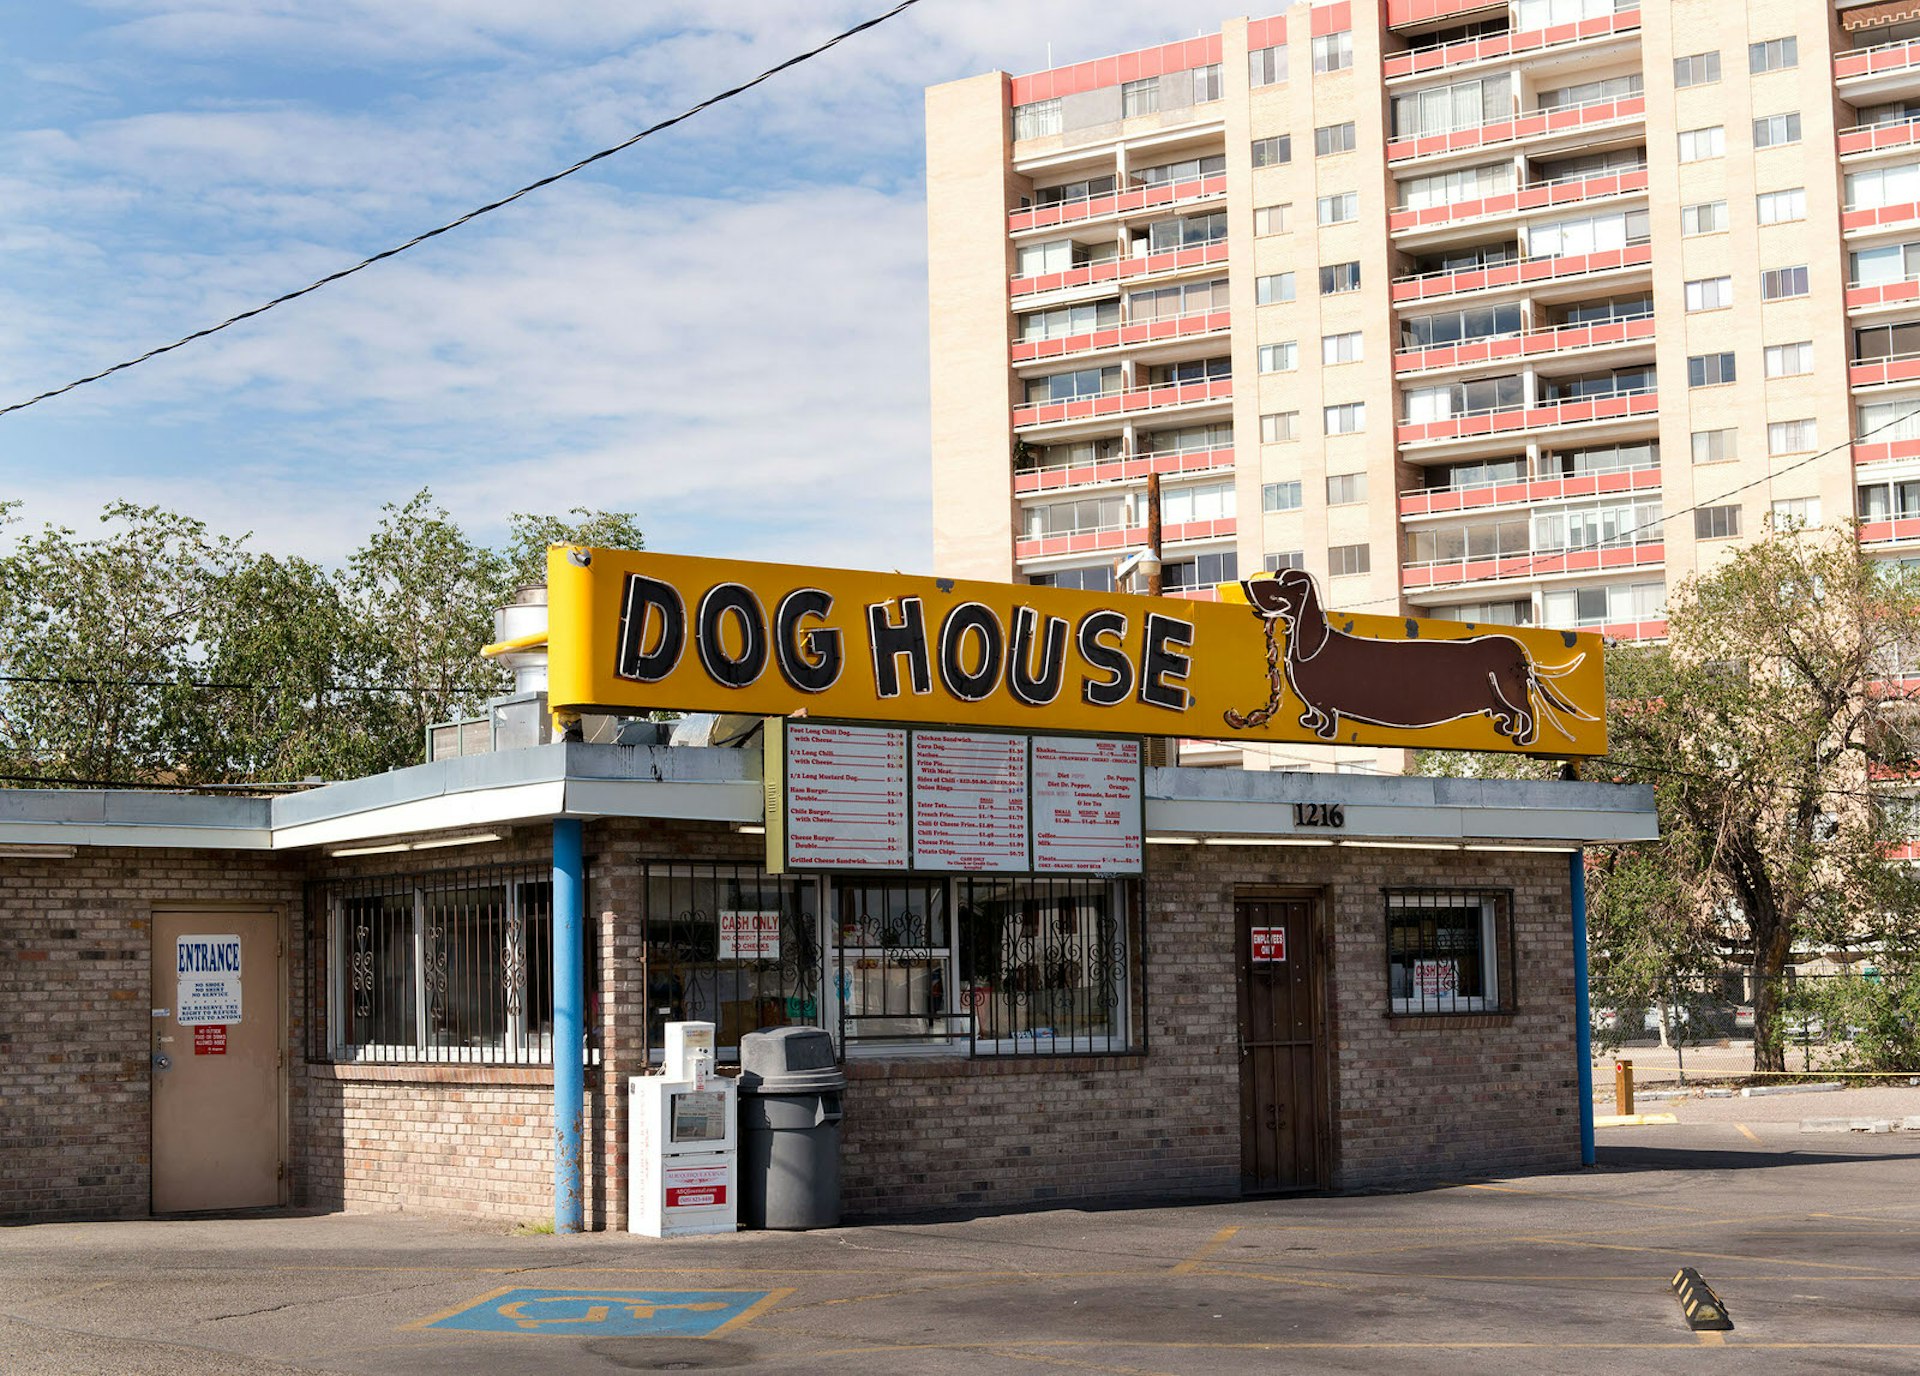 A view of The Dog House restaurant and its sign showing a 'sausage dog' eating sausages 